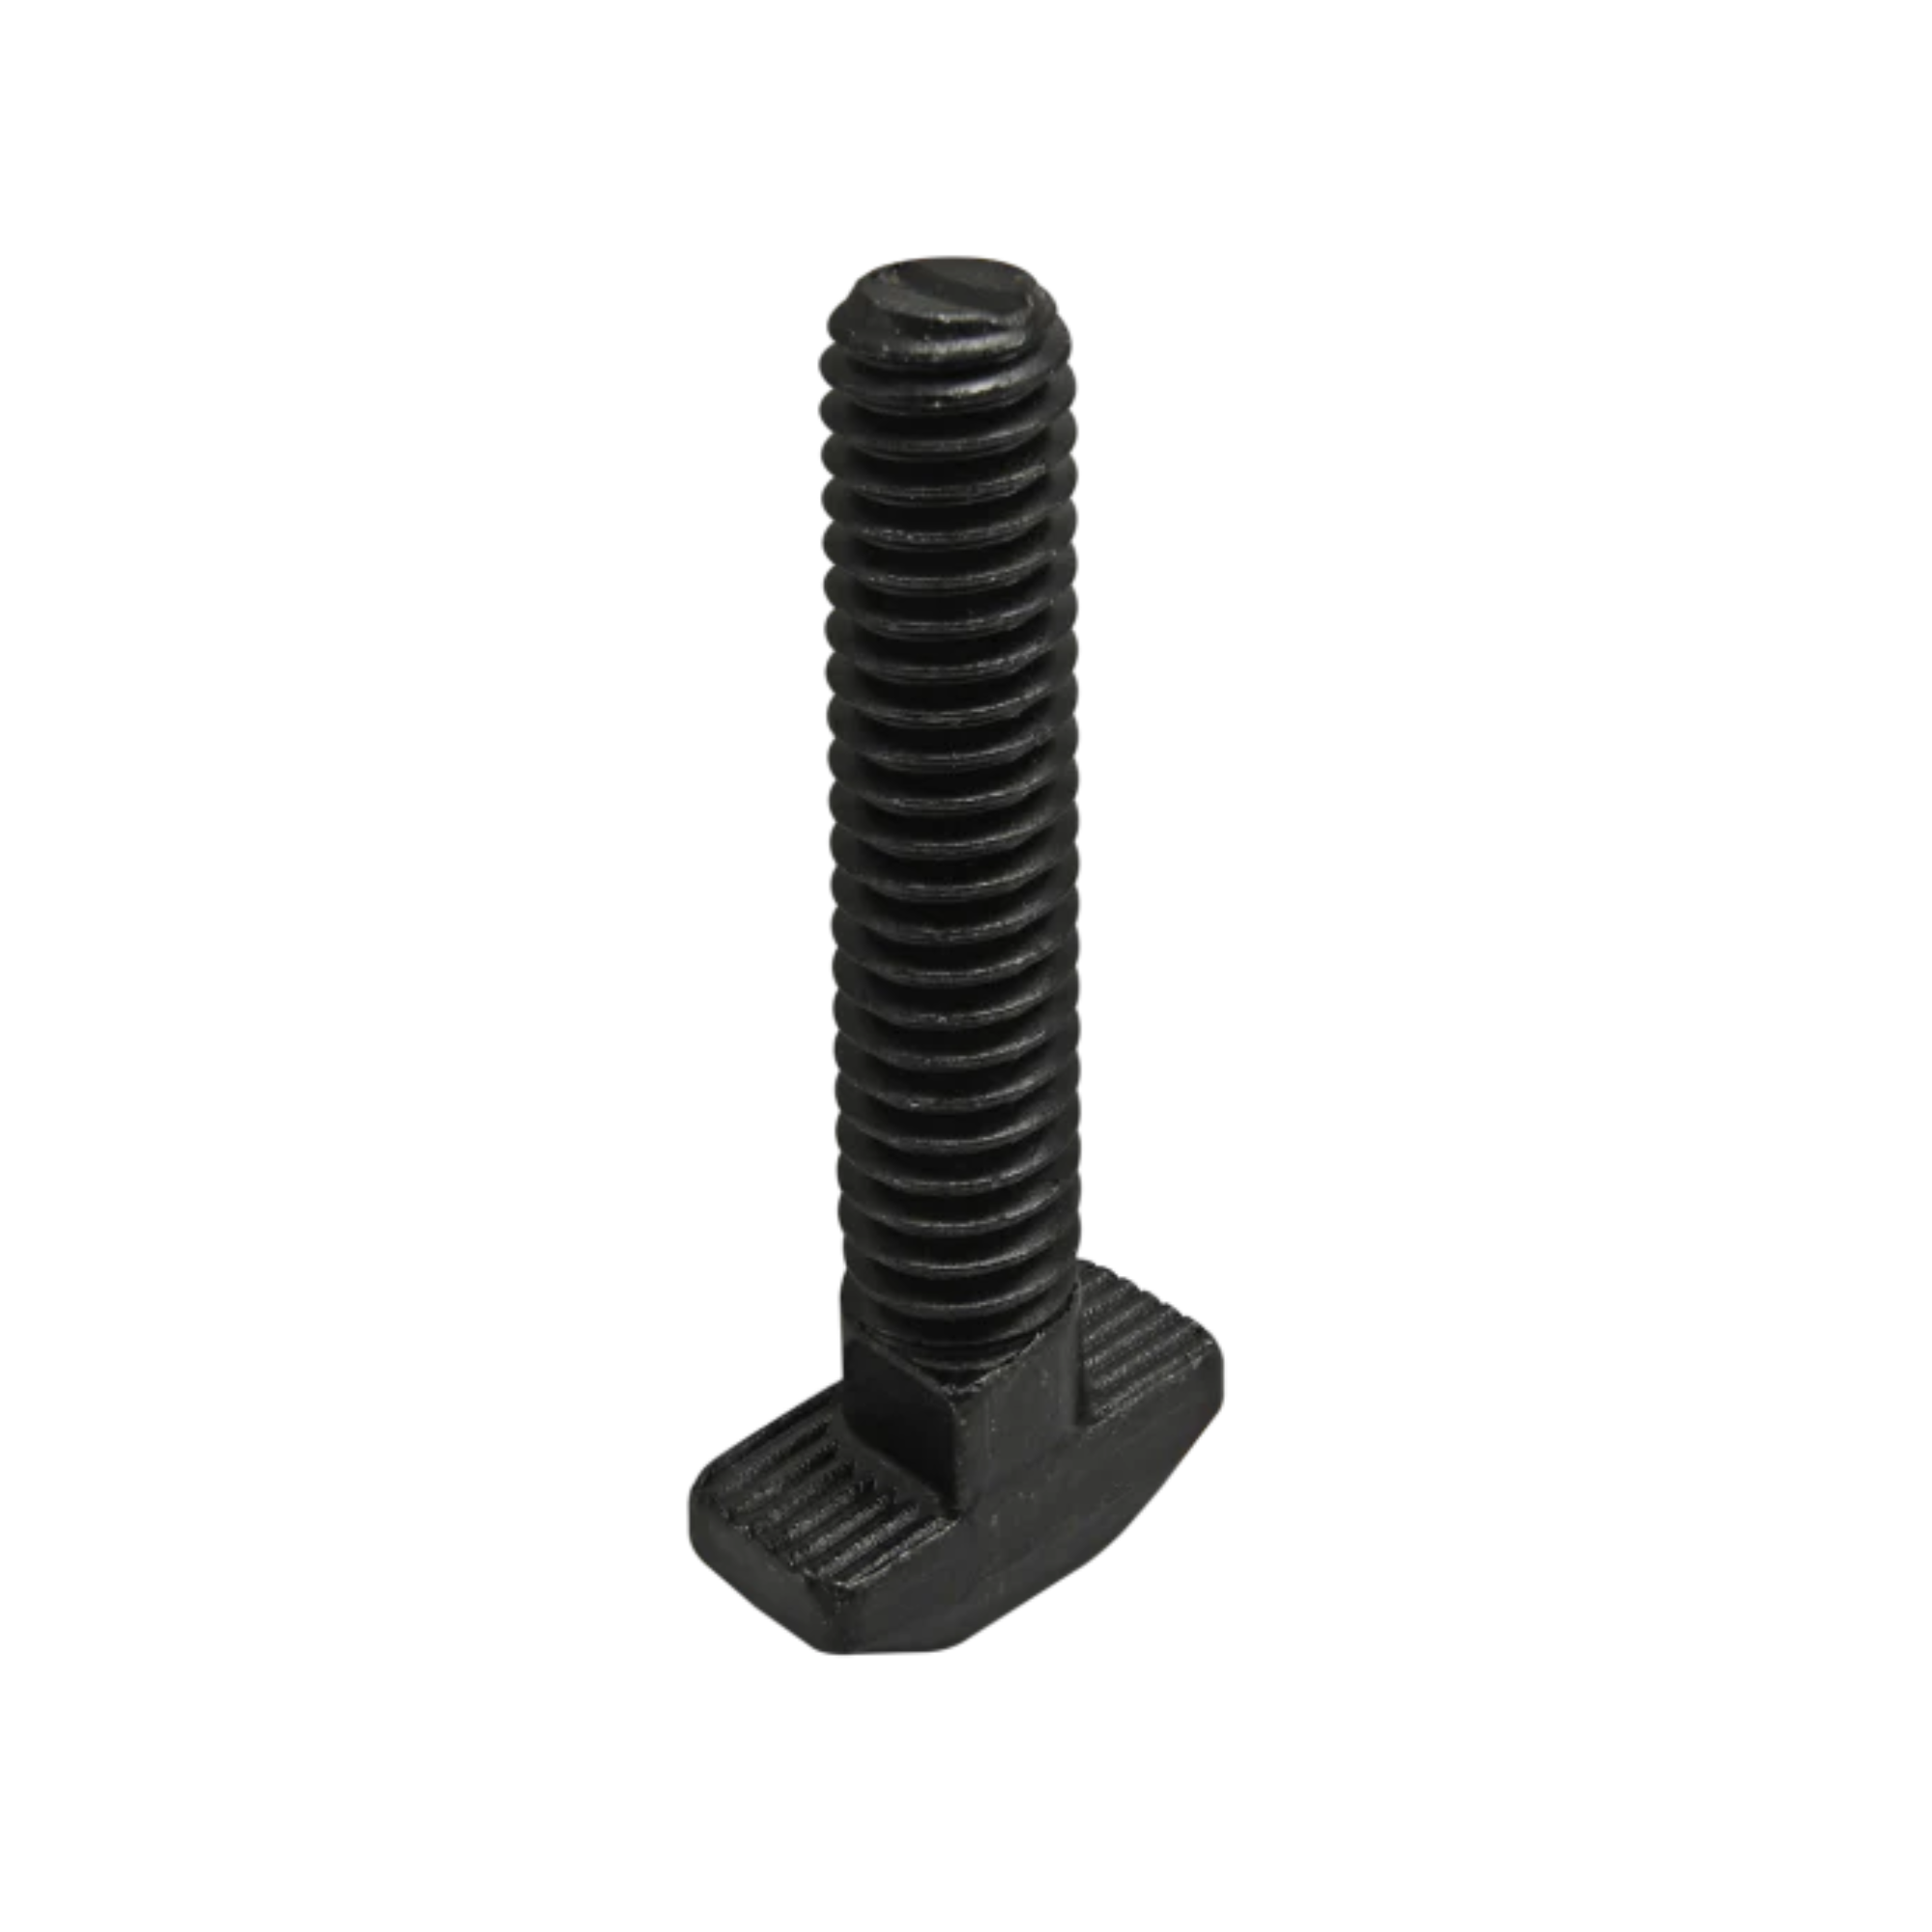 black t-slot stud with a rectangular base and a long threaded stem pointing upward